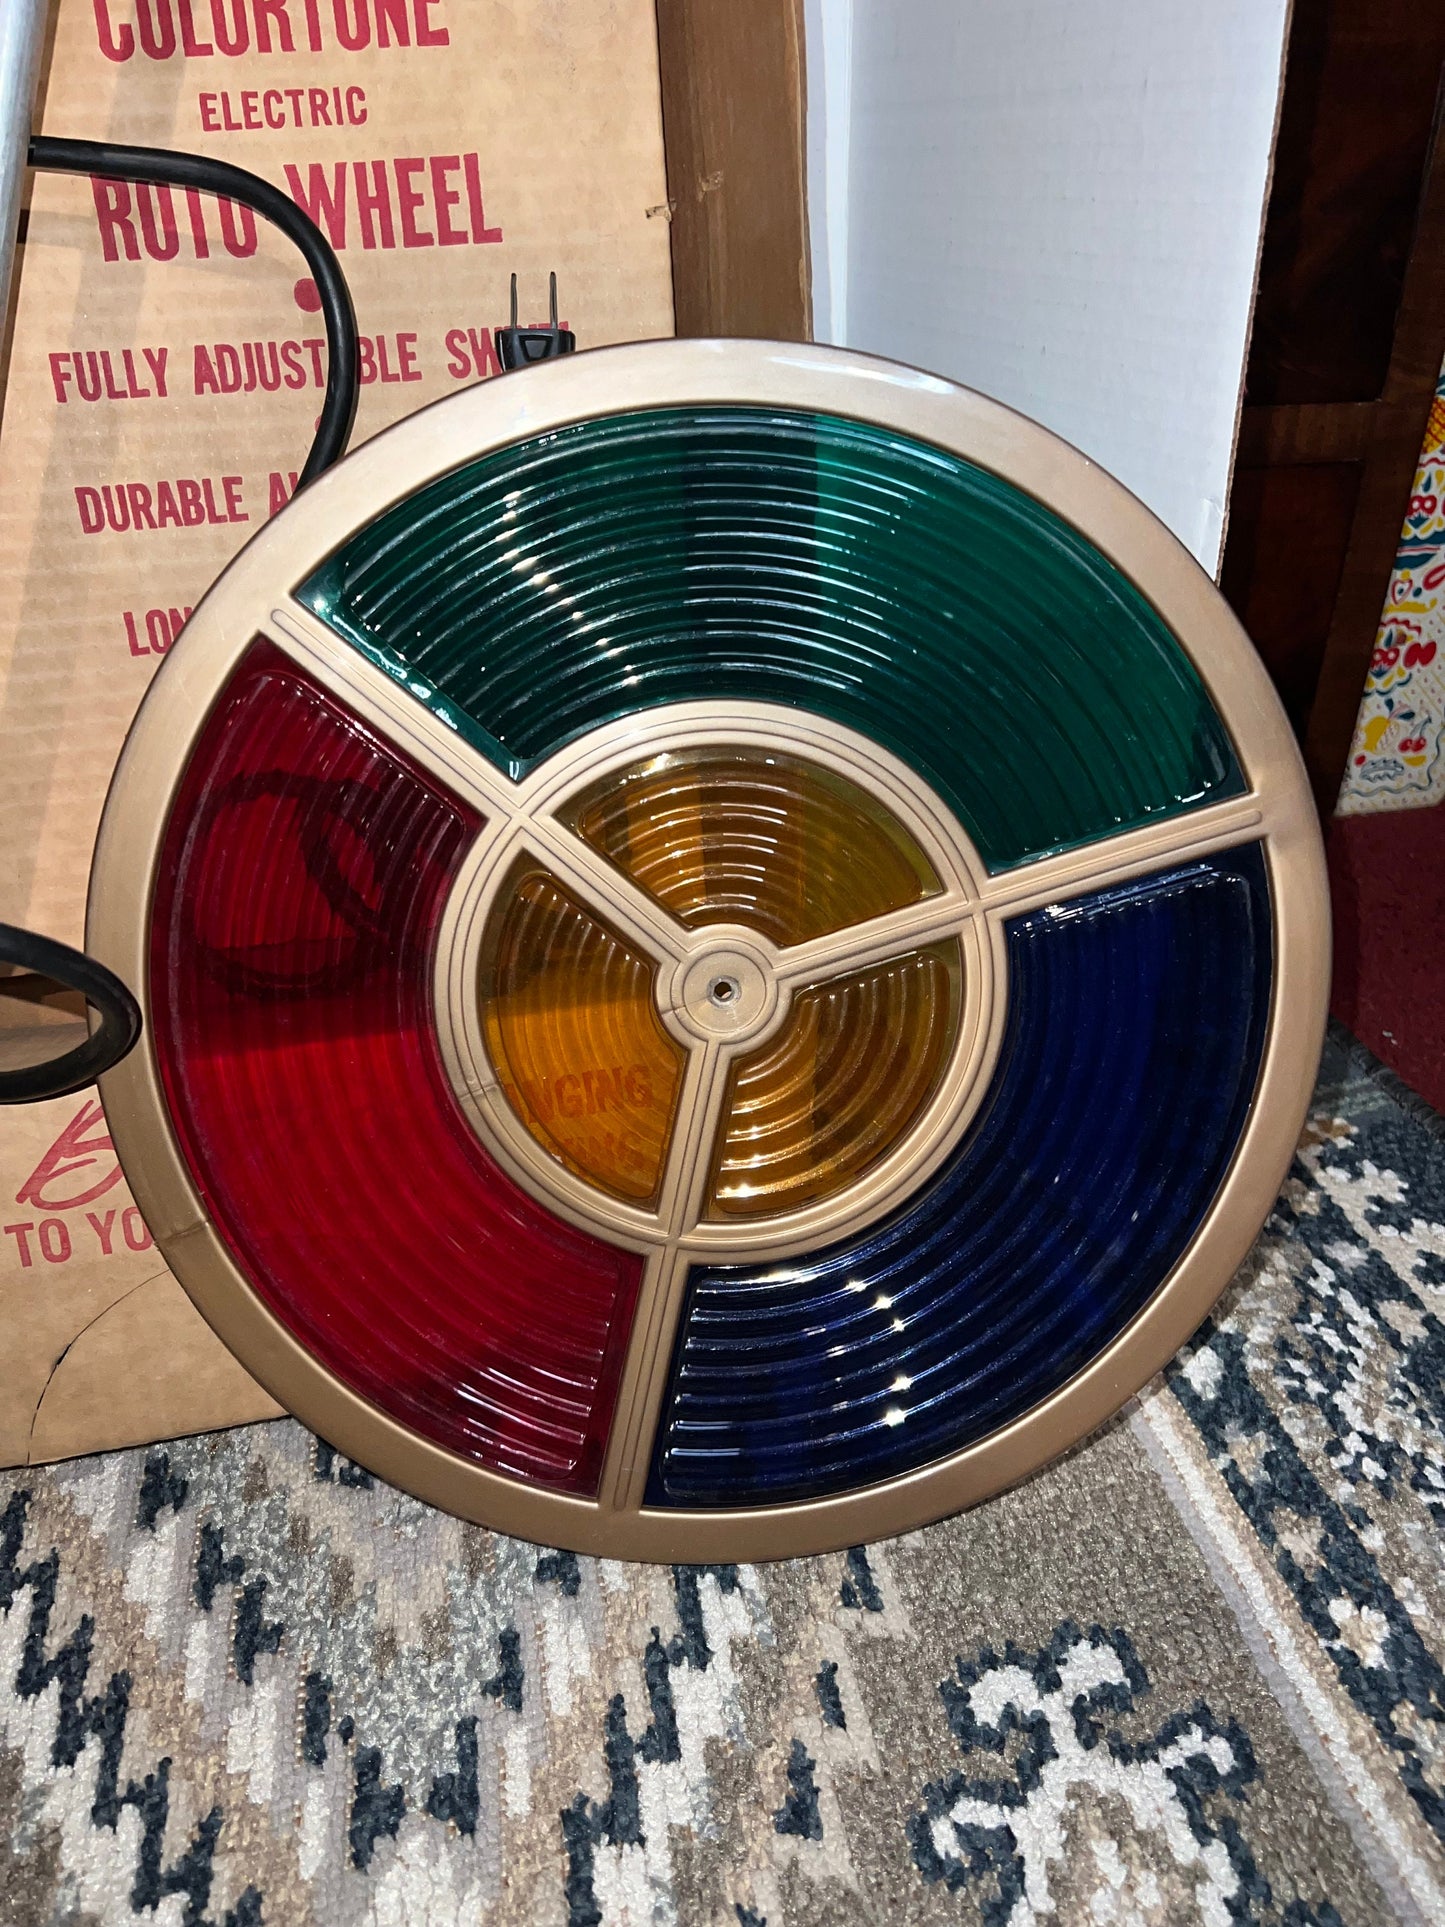 Vintage Christmas mid century color roto wheel color tone outdoor 1950s lawn decoration working kitschy Christmas